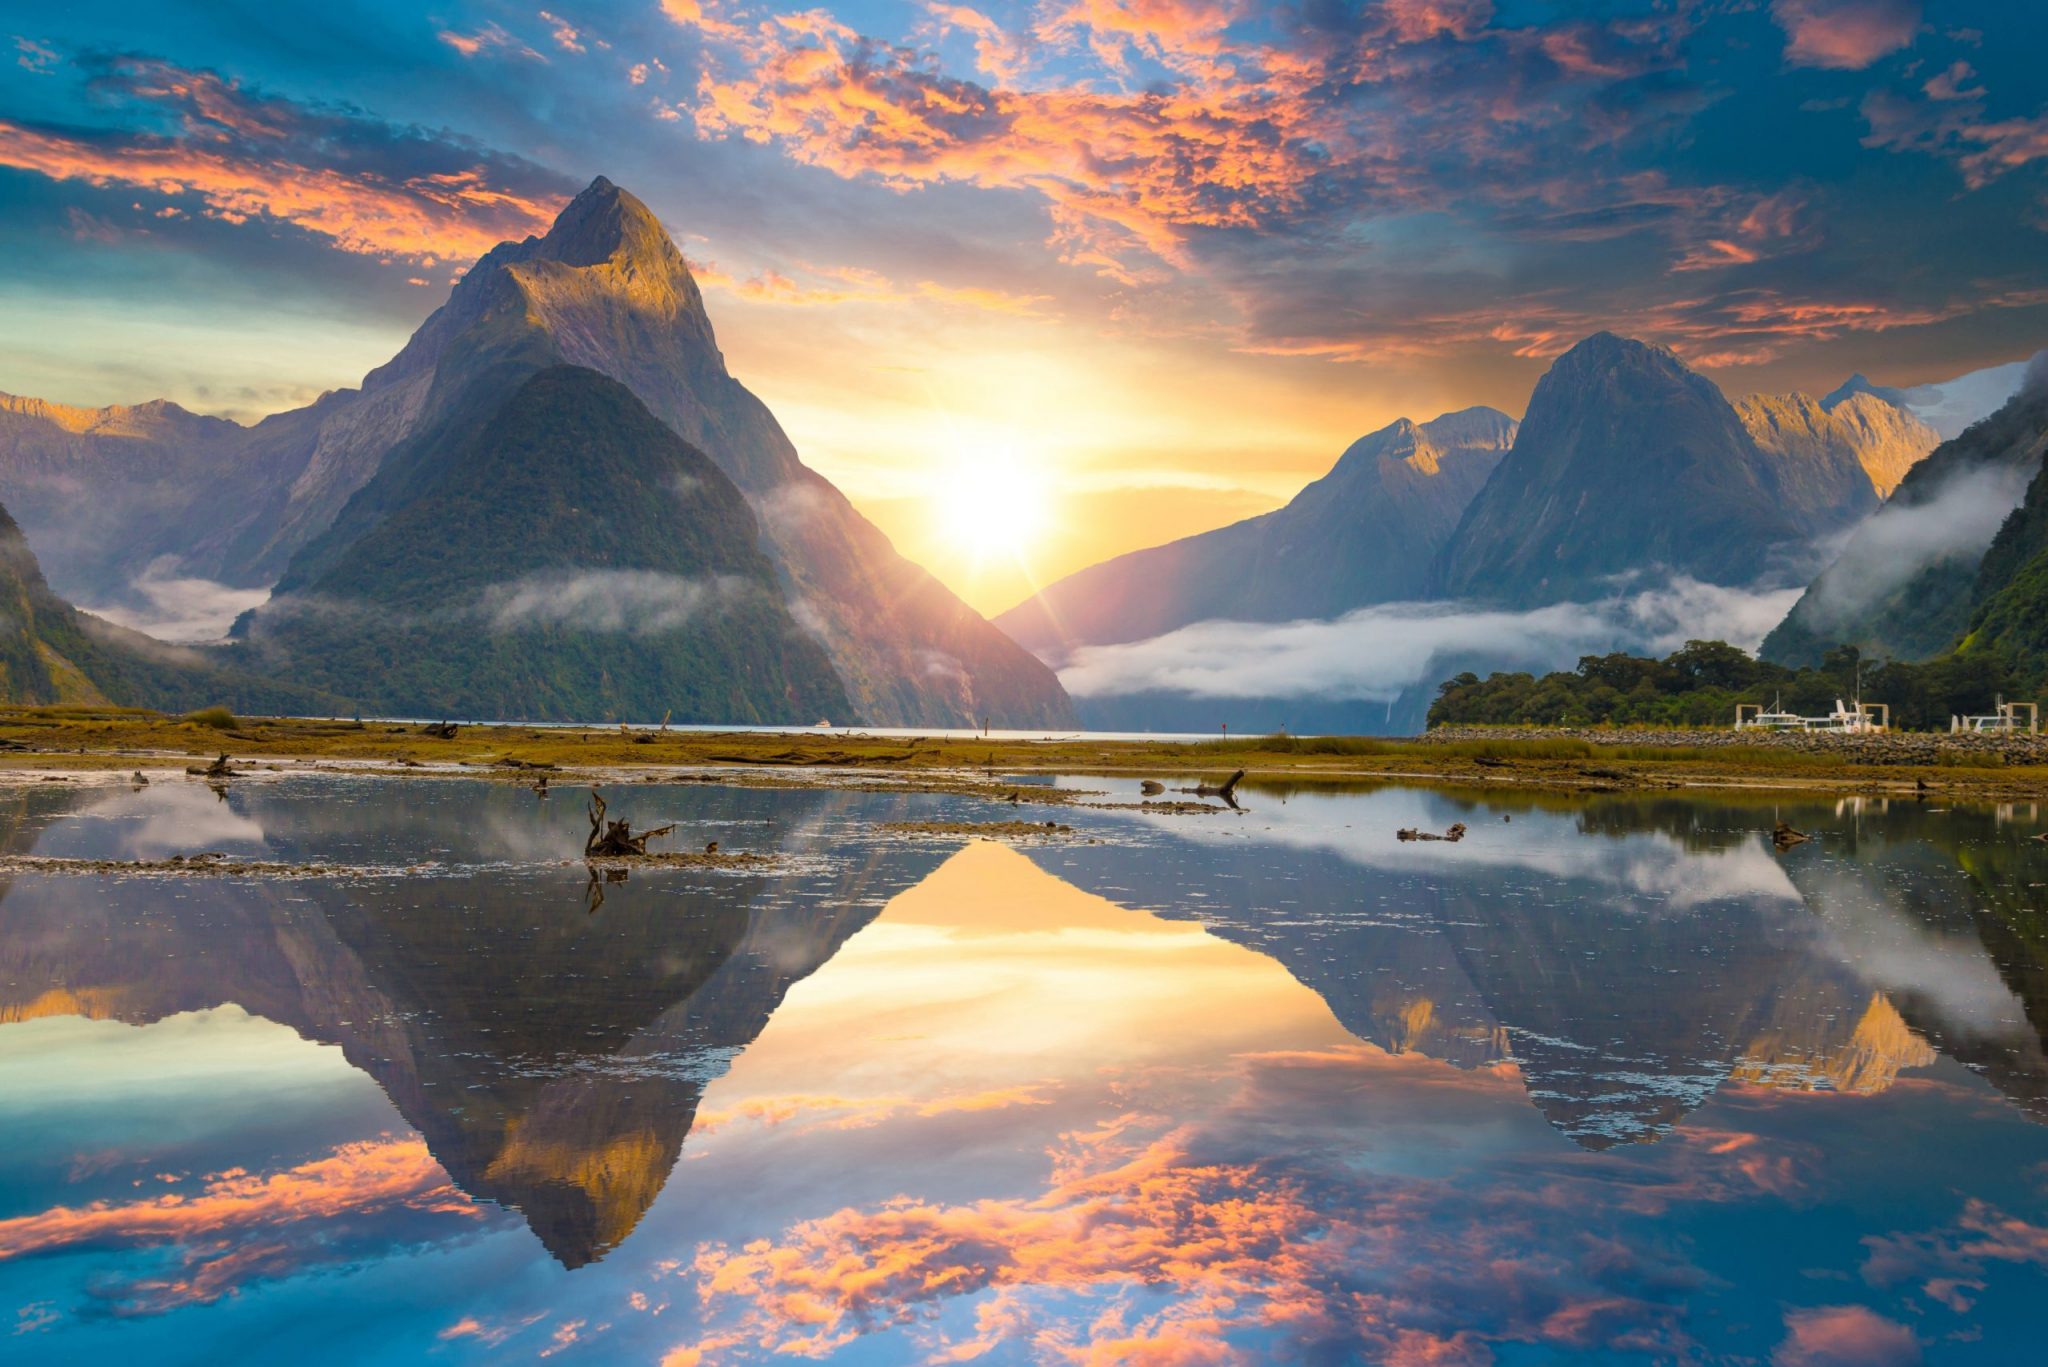 The Milford Sound fiord. Fiordland national park, New Zealand